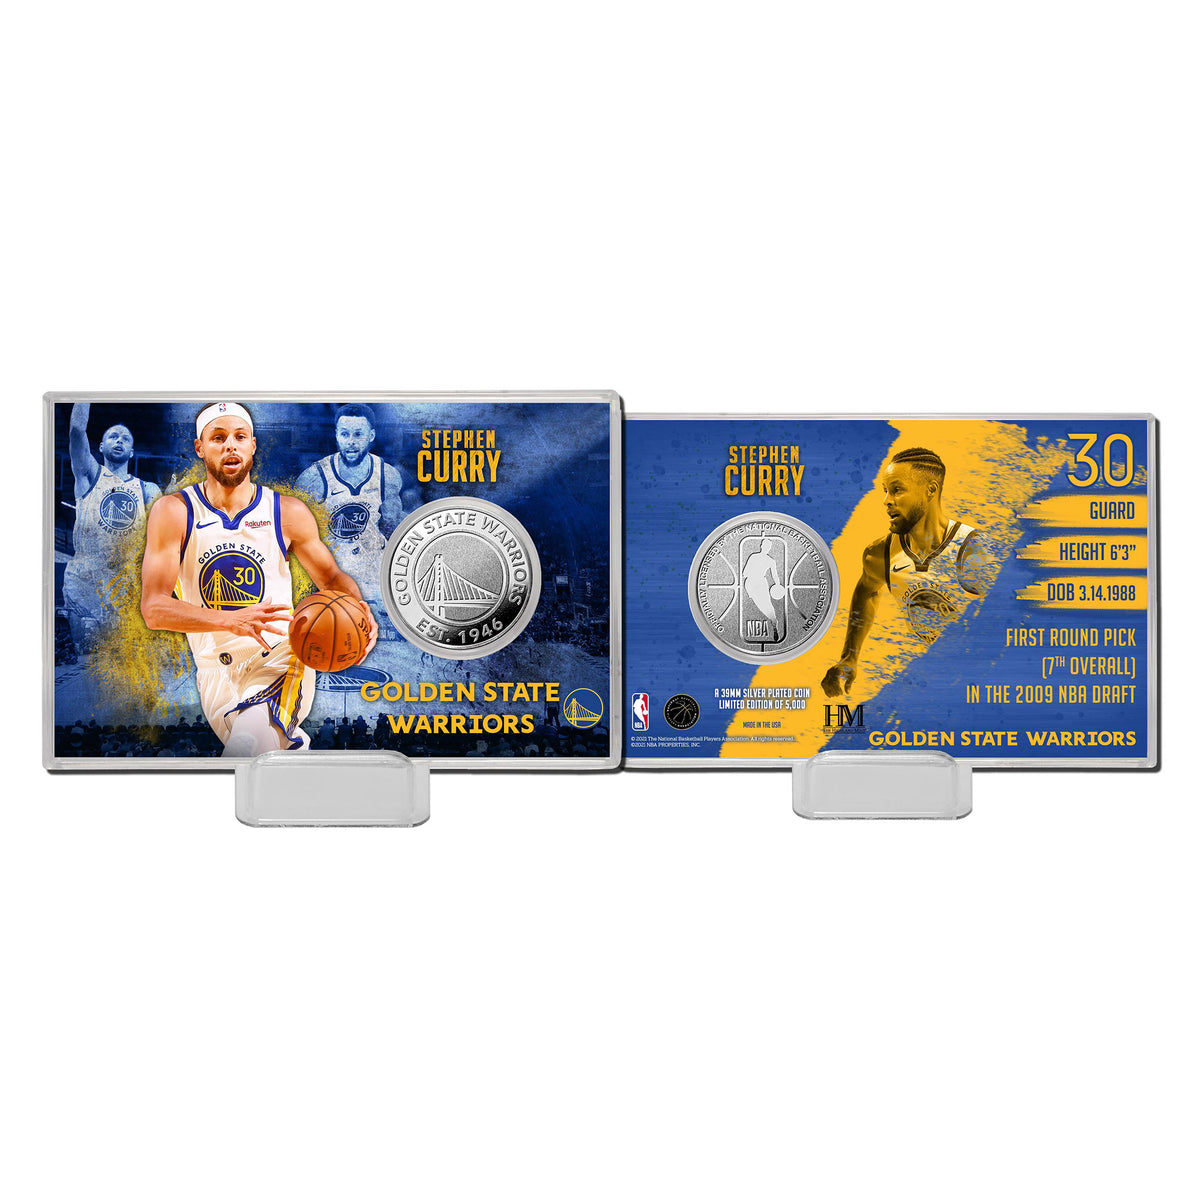 CURRY (Warriors) Silver Mint Coin in Presentation Display